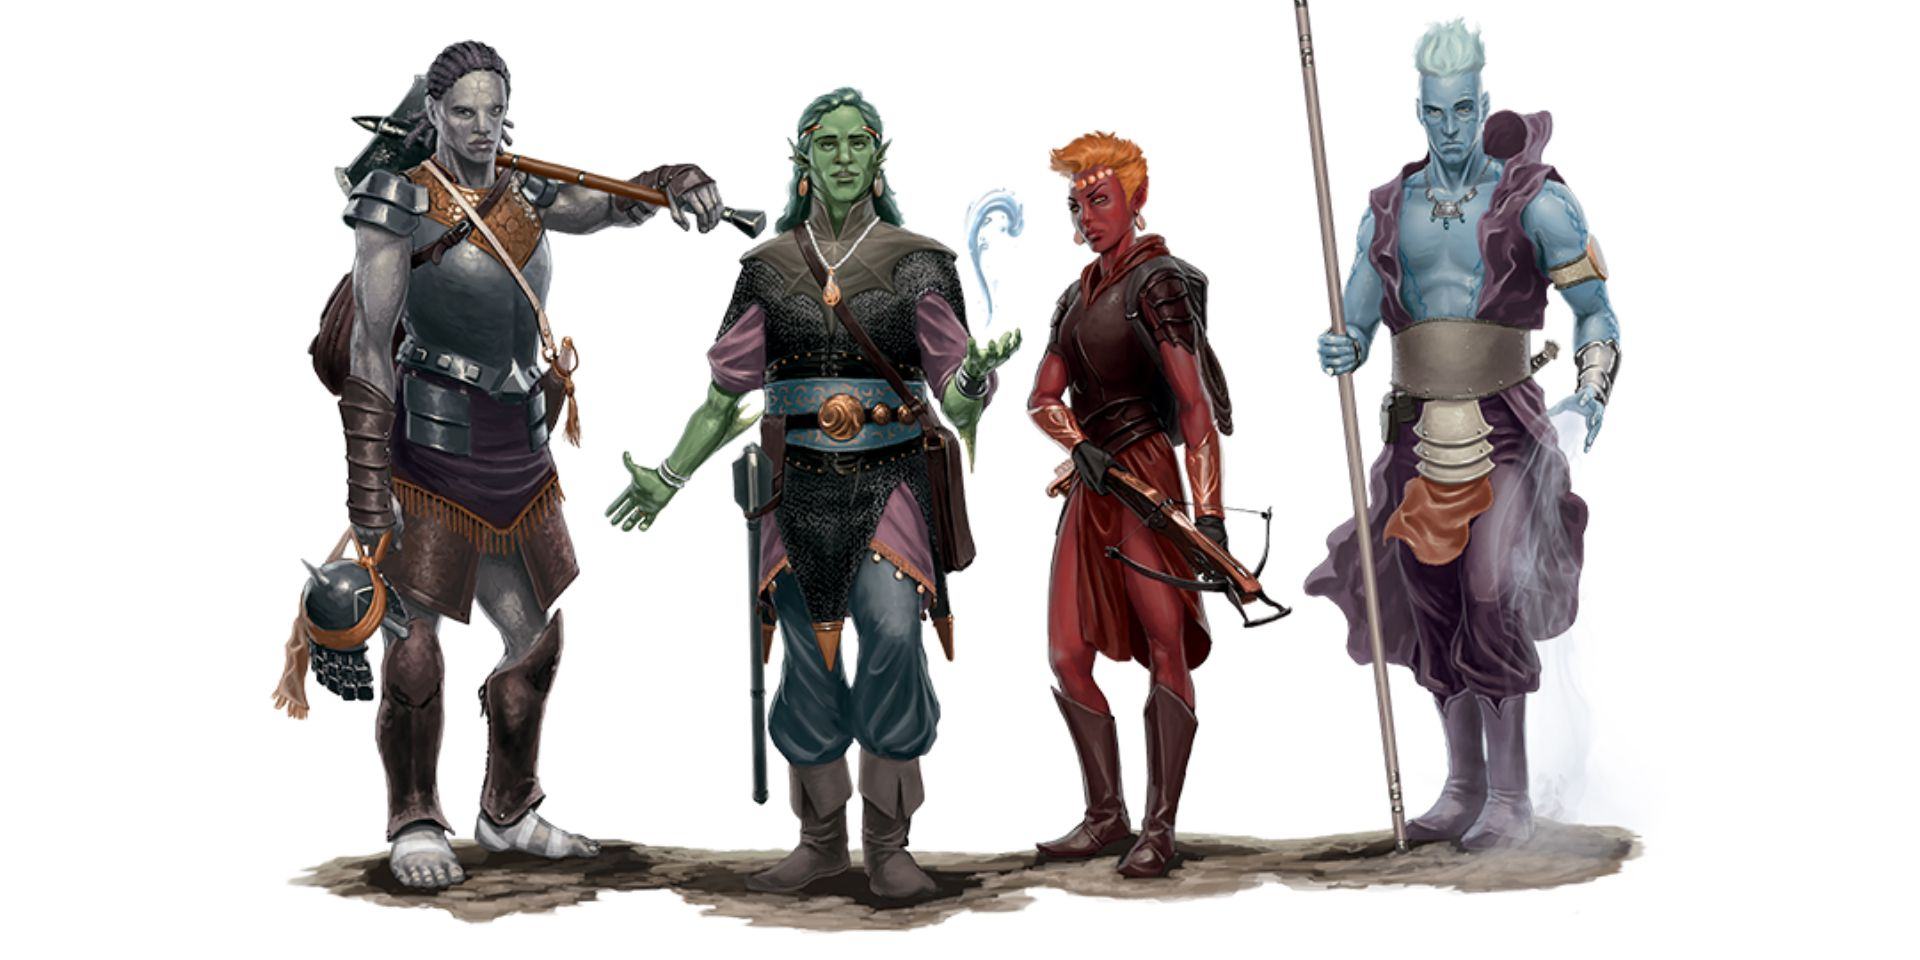 Four Dungeons and Dragons characters standing in front of a white background.